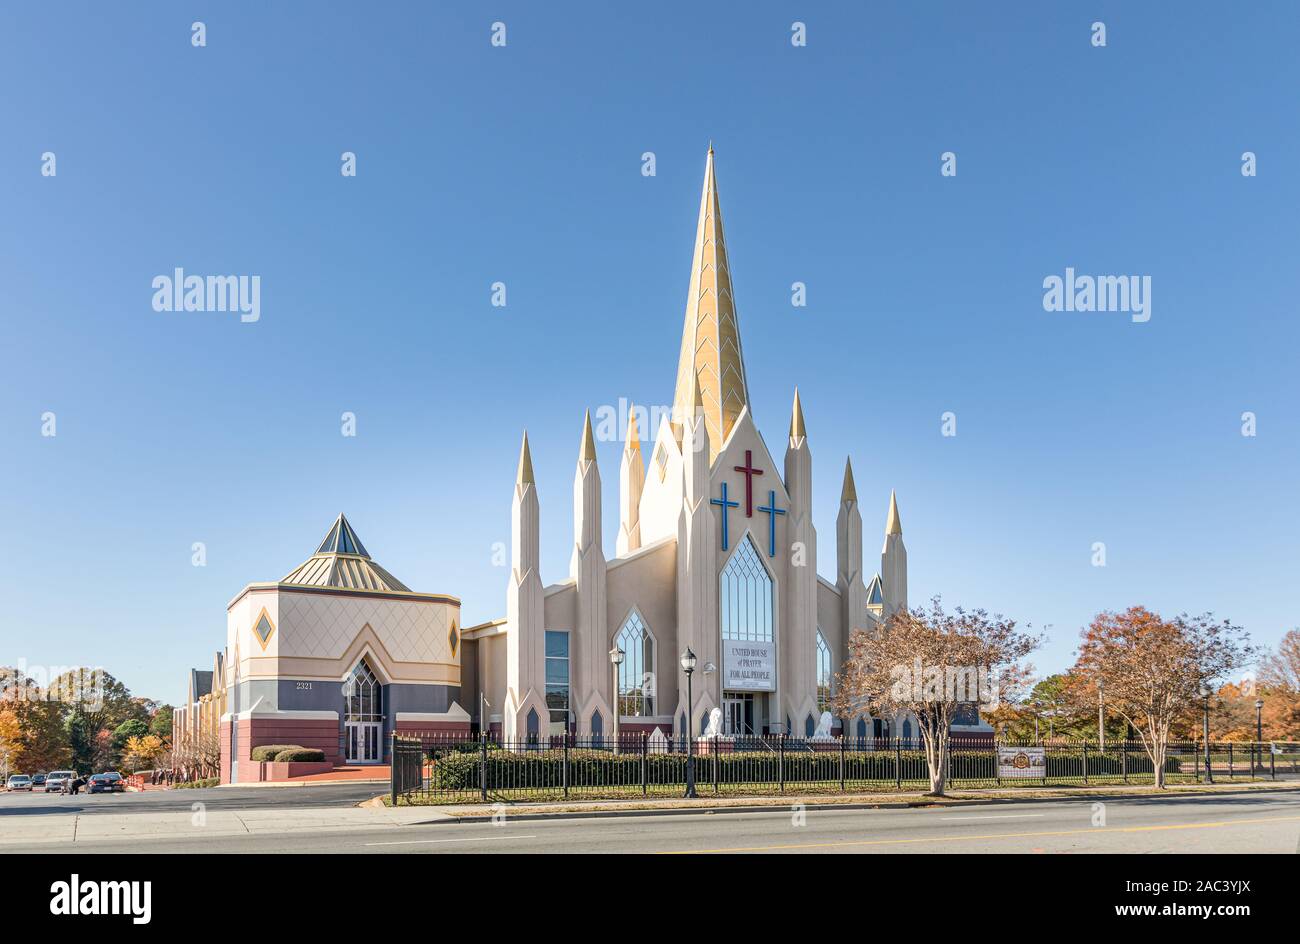 CHARLOTTE, NC, USA- 24 NOV 2019: The United House of Prayer for all People of the Church on the Rock of the Apostolic Faith, on Beatties Ford Road. Stock Photo